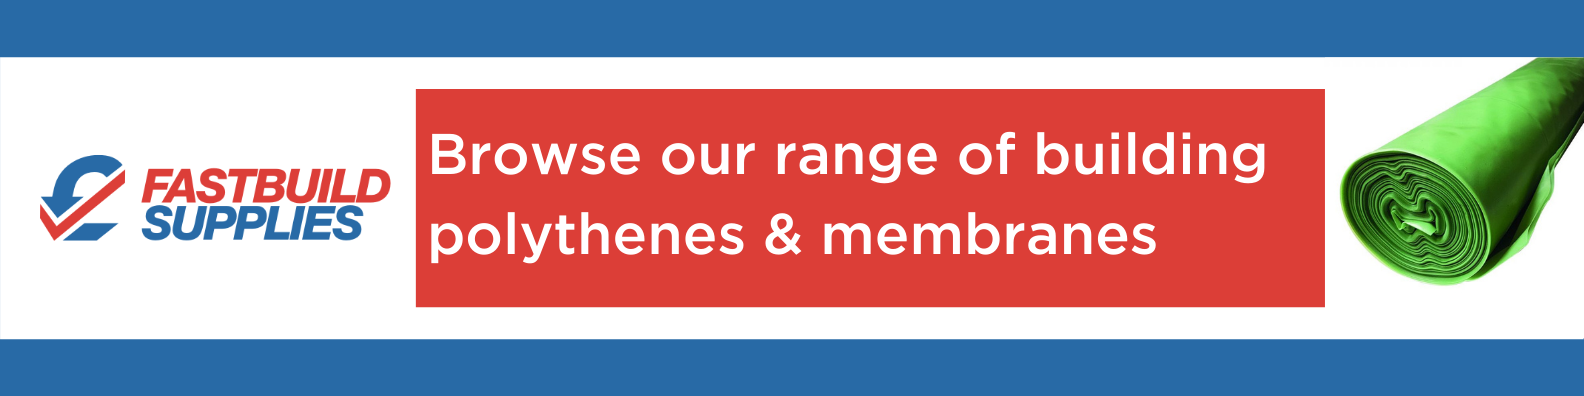 Browse our range of polythenes and membranes now